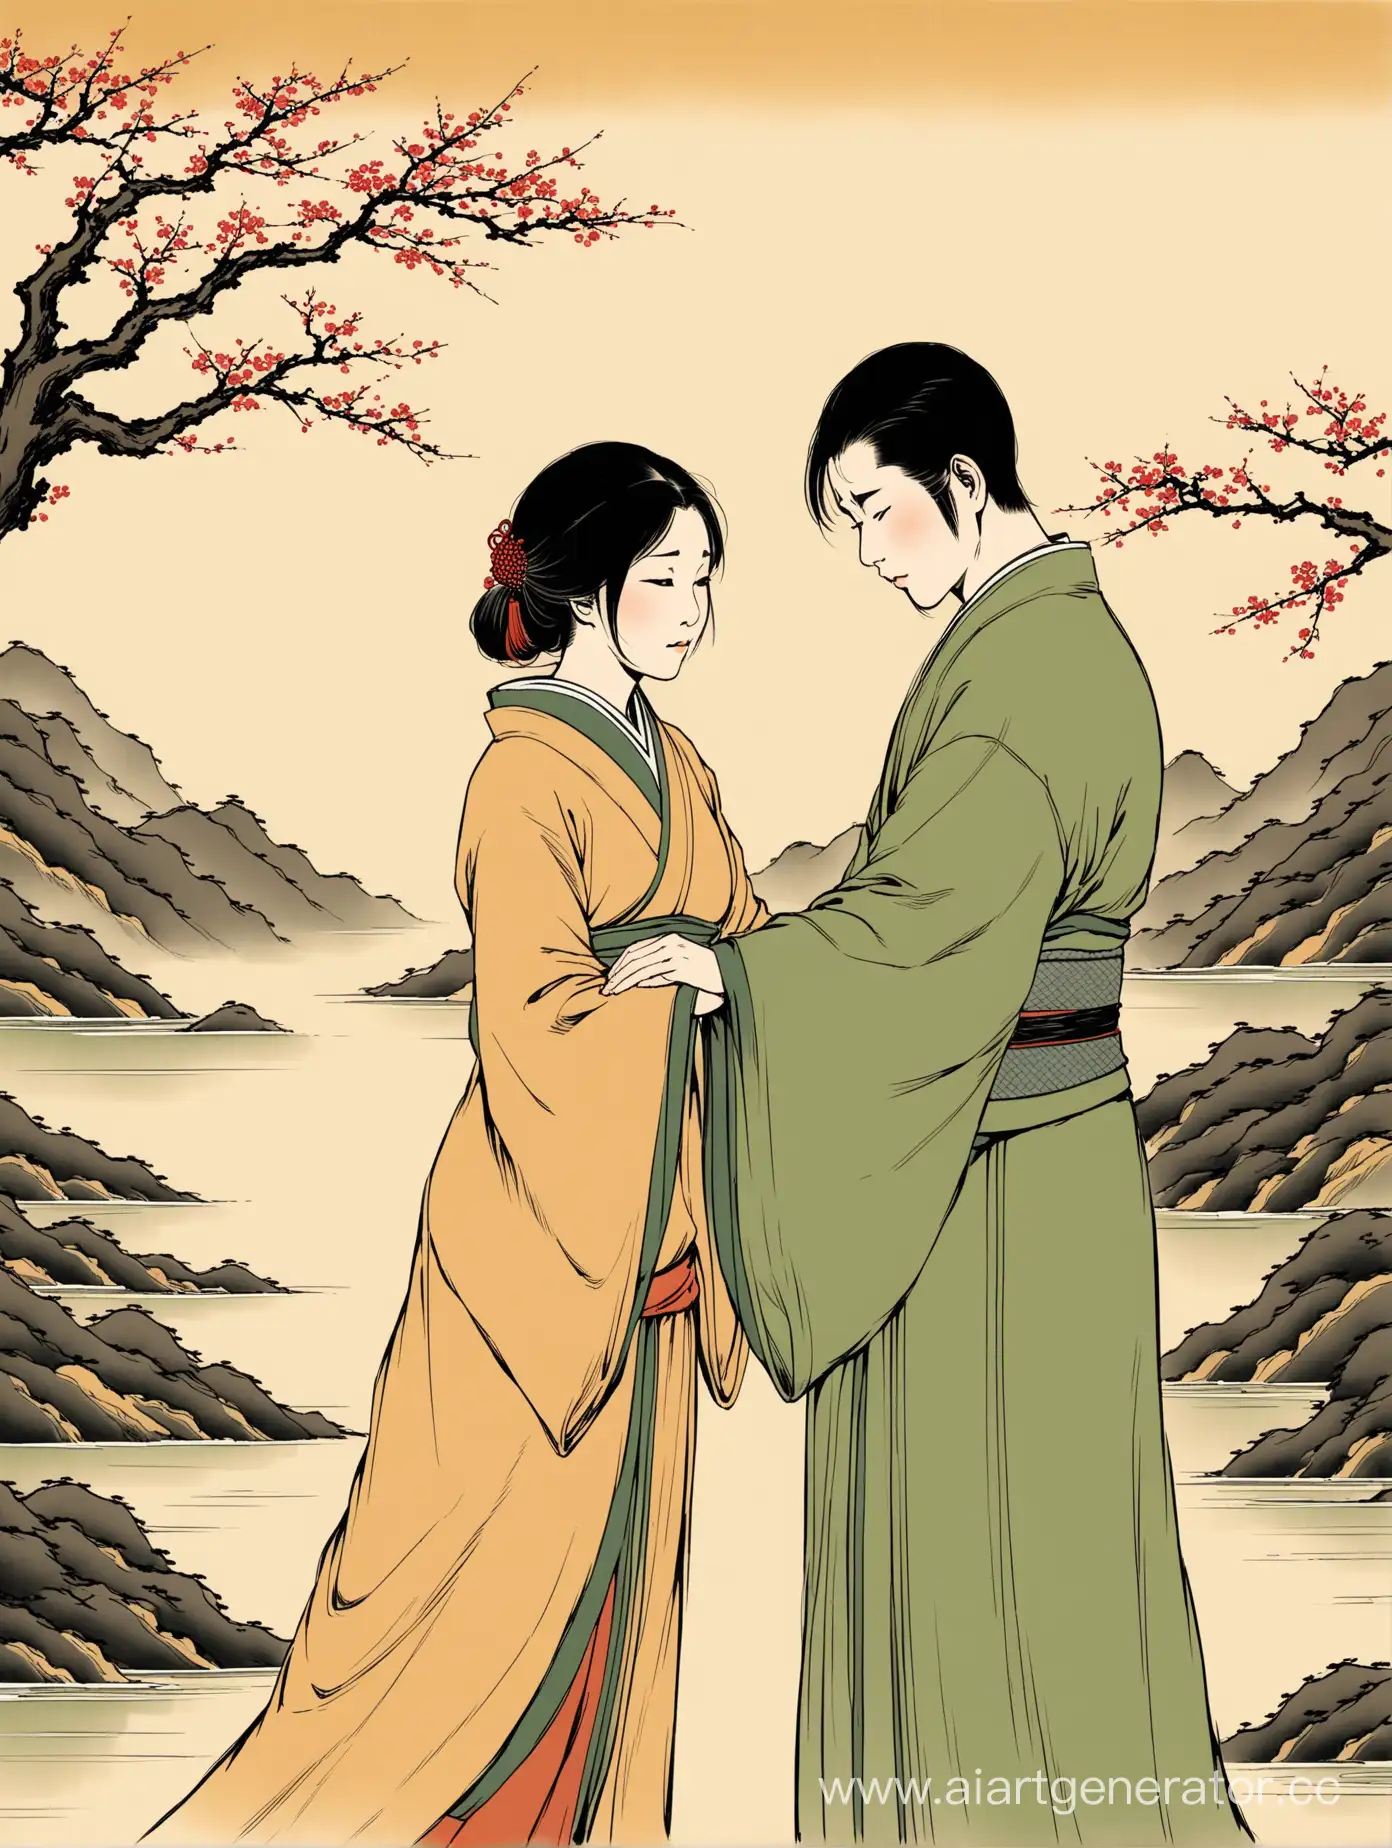 Sad-Asian-Couple-Parting-Ways-Traditional-Asian-Painting-Style-Depiction